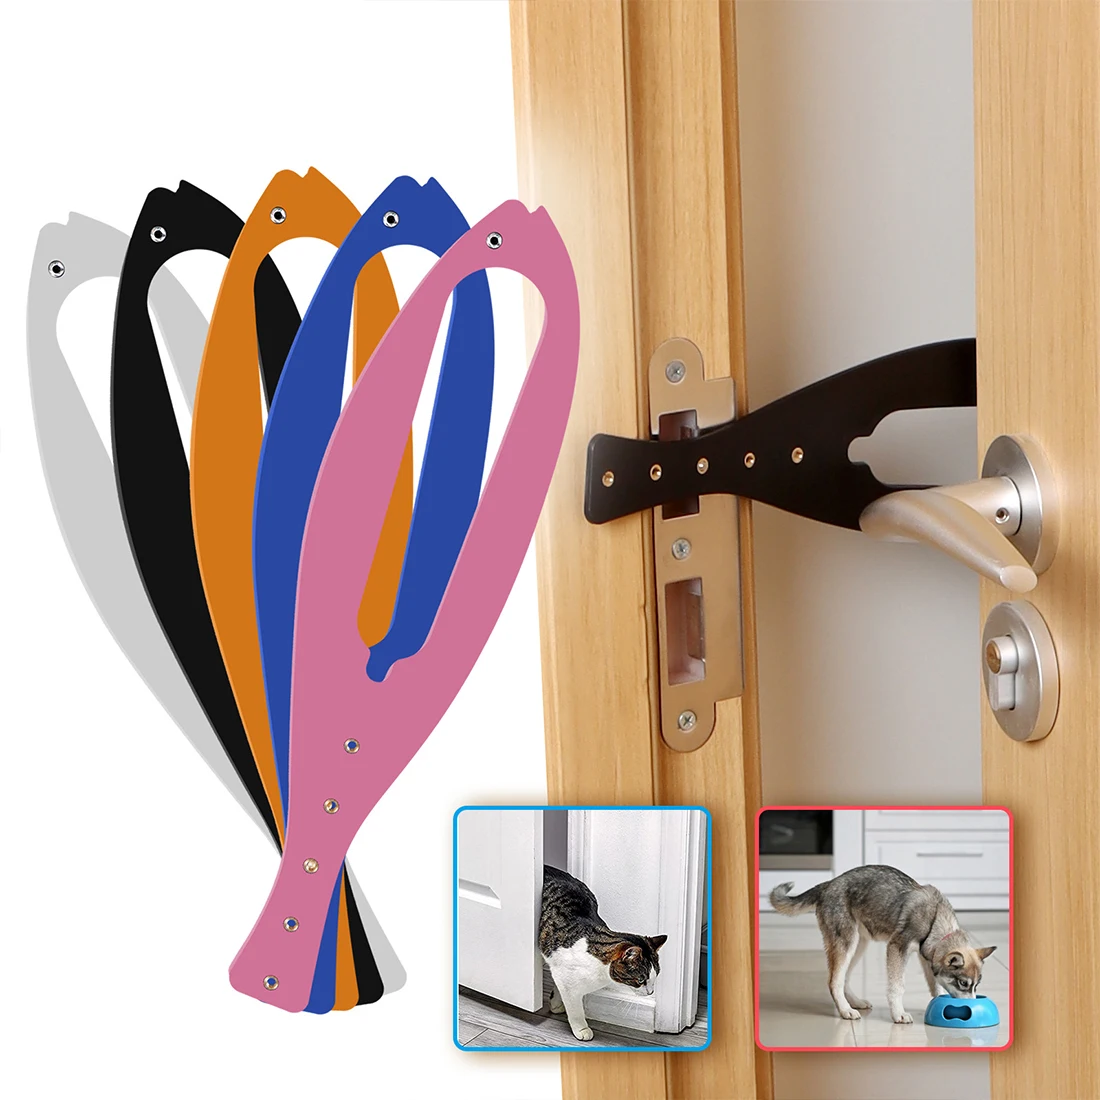 

Pet Dog Cat Doorstop Allow Cats In And Keeps Dogs Outside Fast Latch Plastic Strap Door Holder Latch Cat Accessories